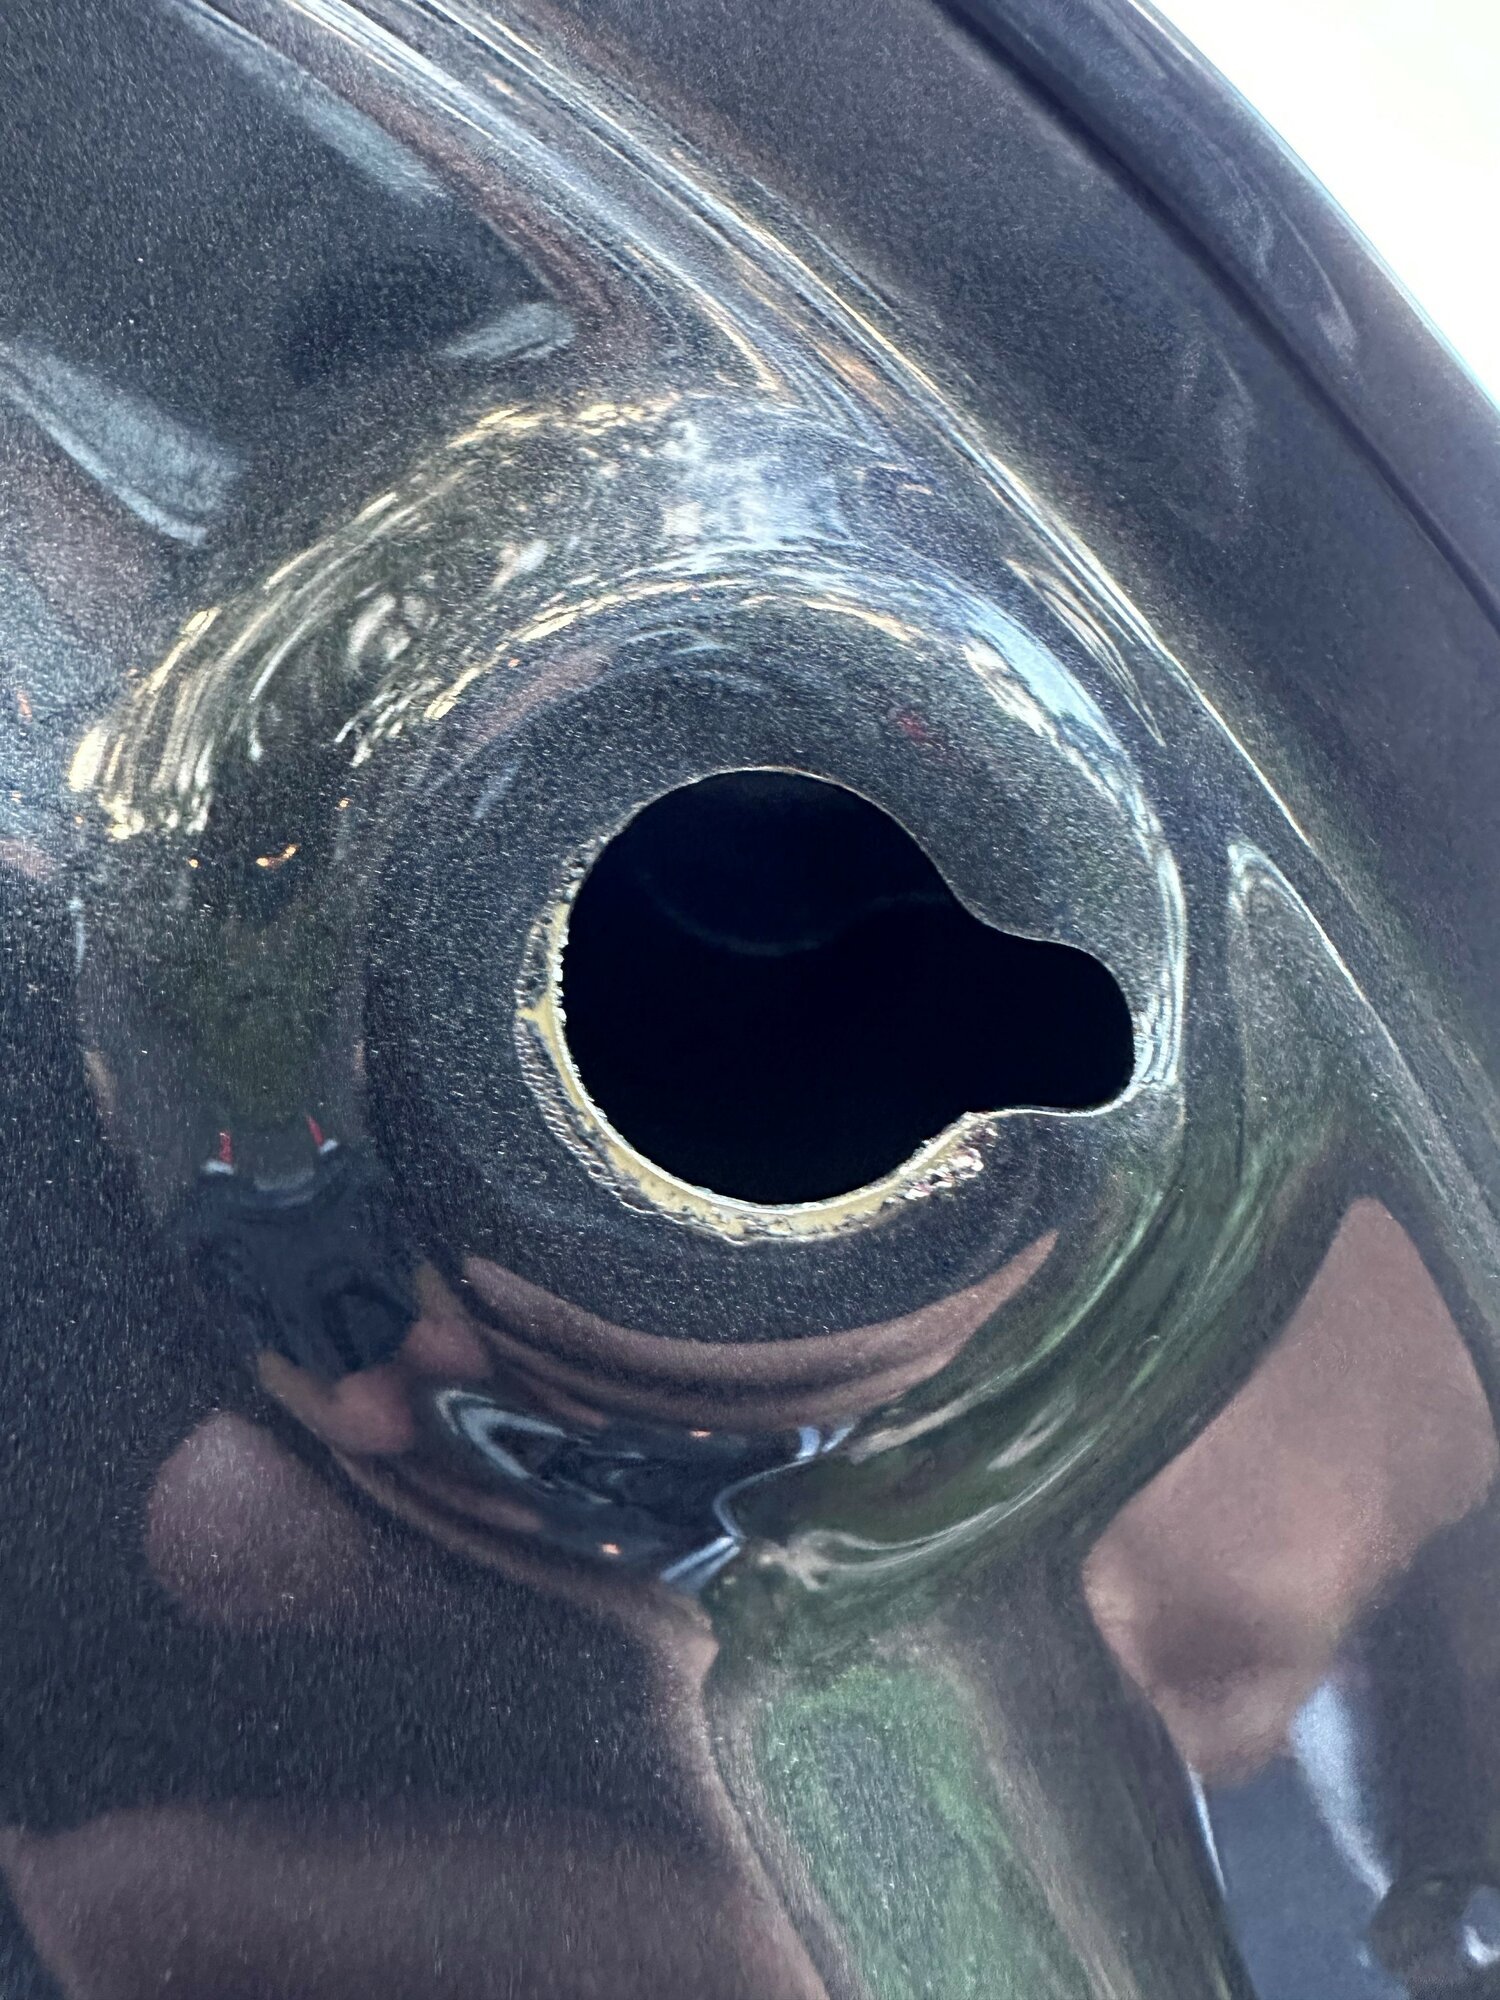 Front trunk rubber stopper hole.jpg